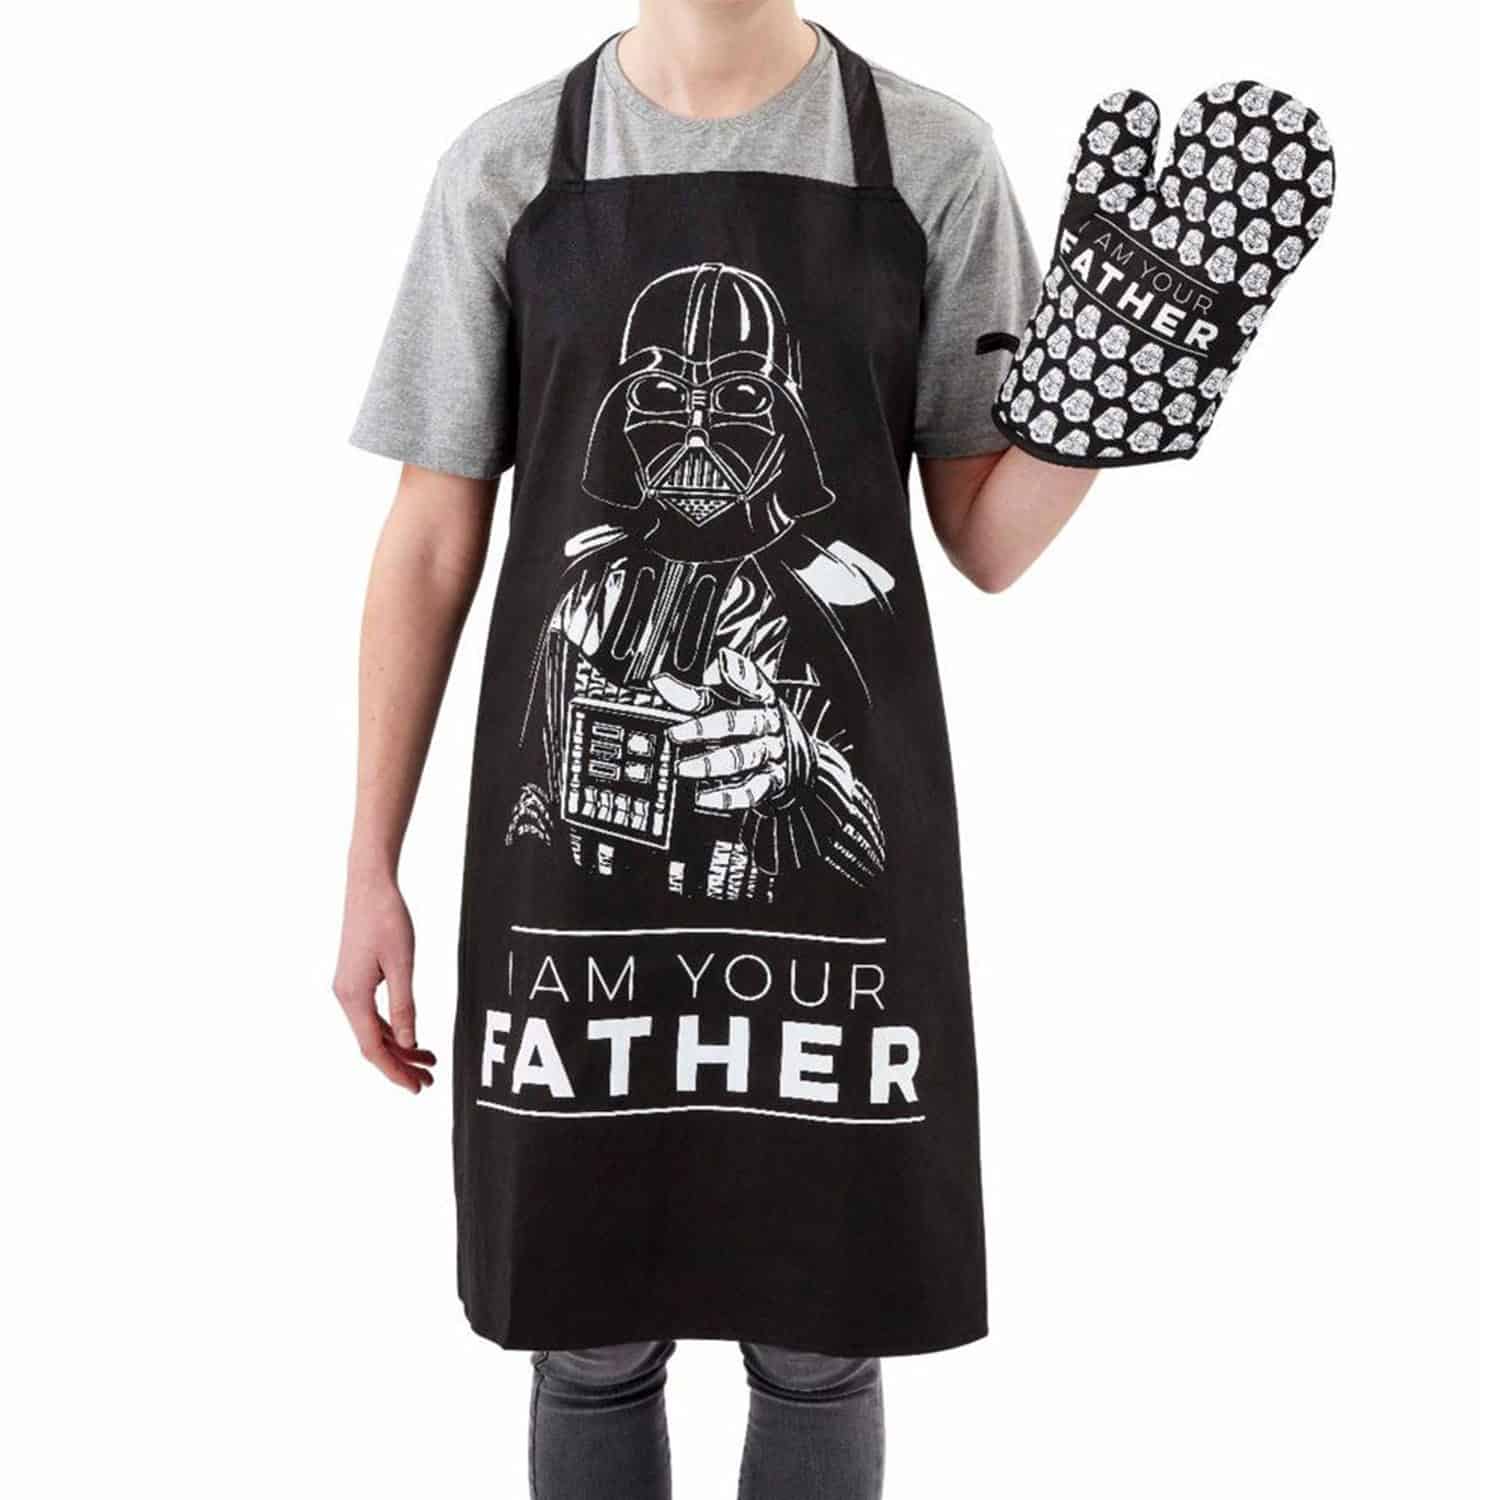 For one day only, all Star Wars oven mitts are 15% off! Order